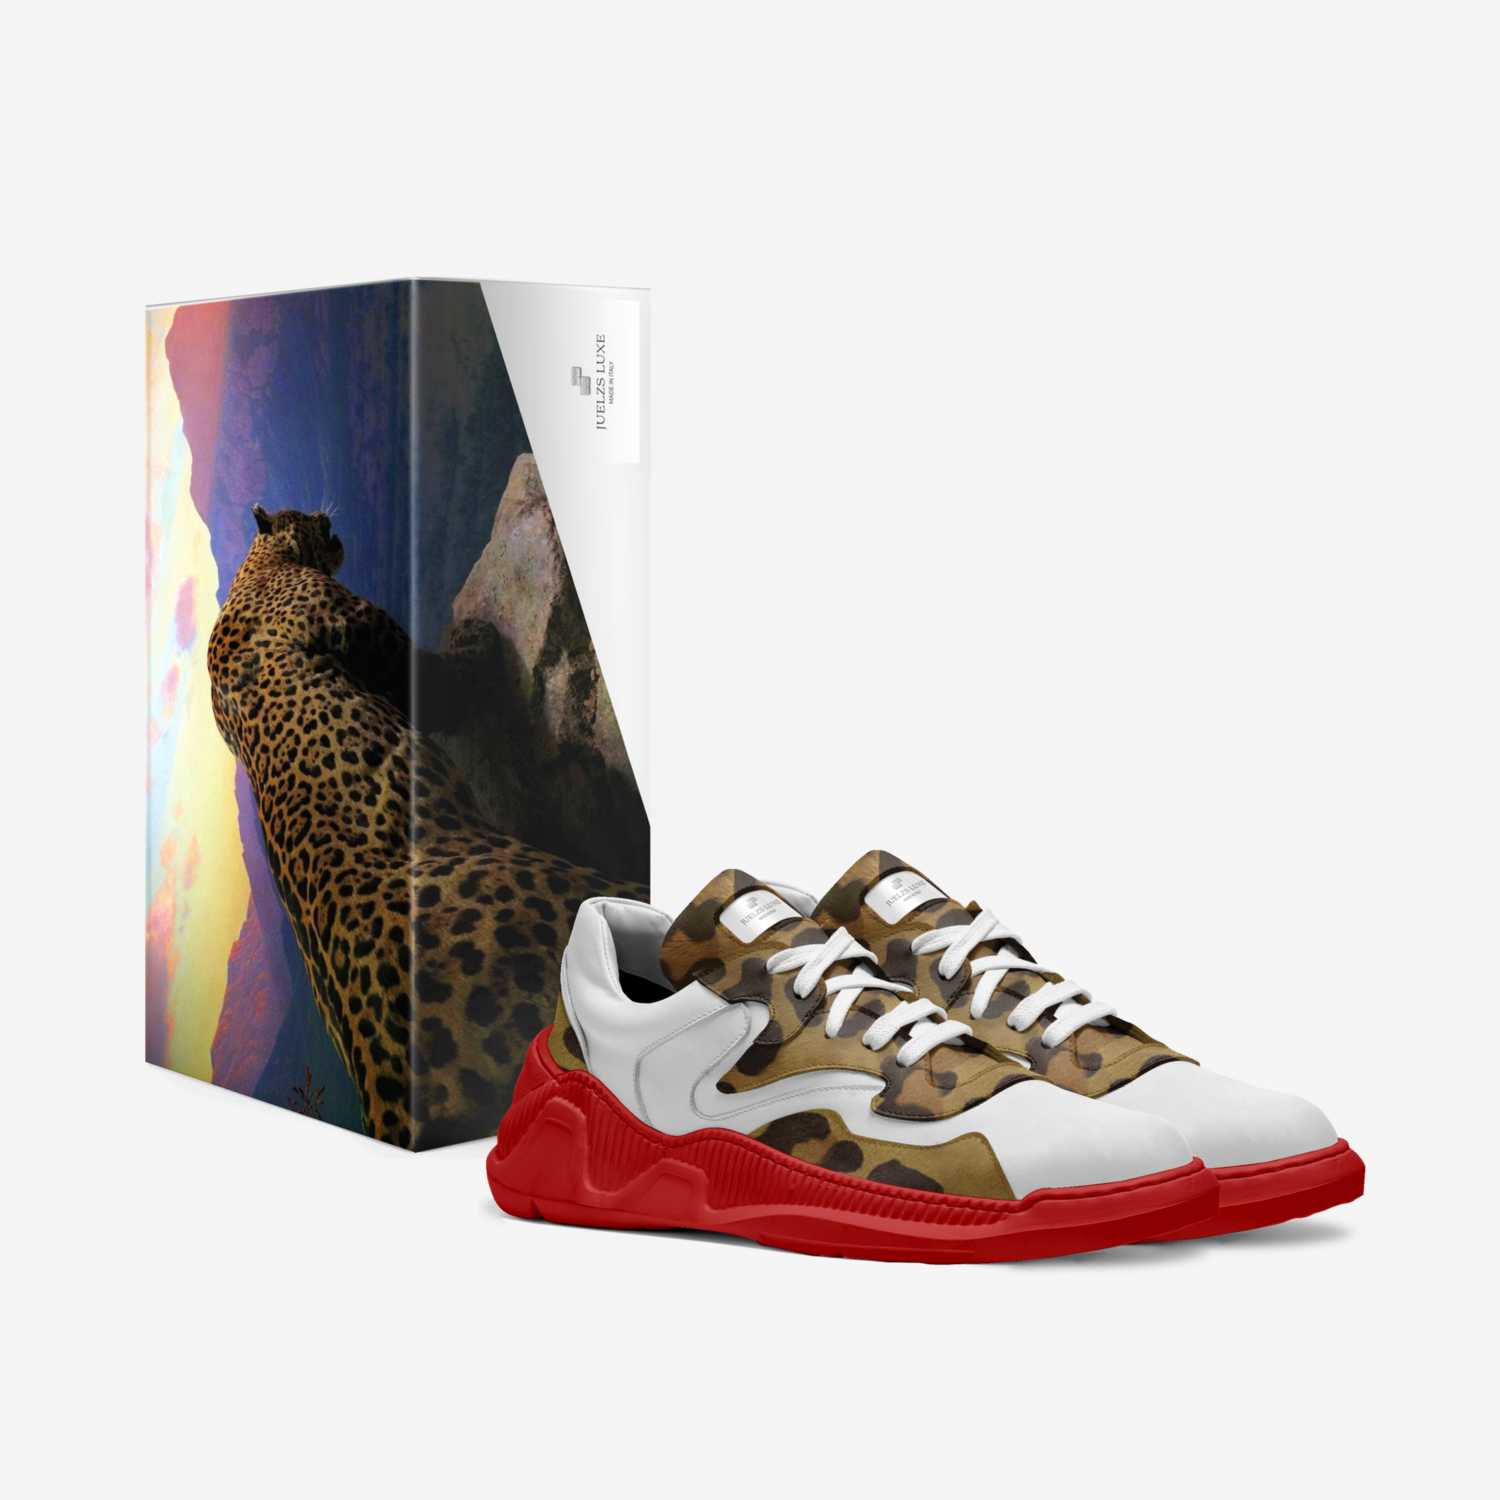 JUELZS 1 EXOTICX custom made in Italy shoes by Juelzs Luxe | Box view